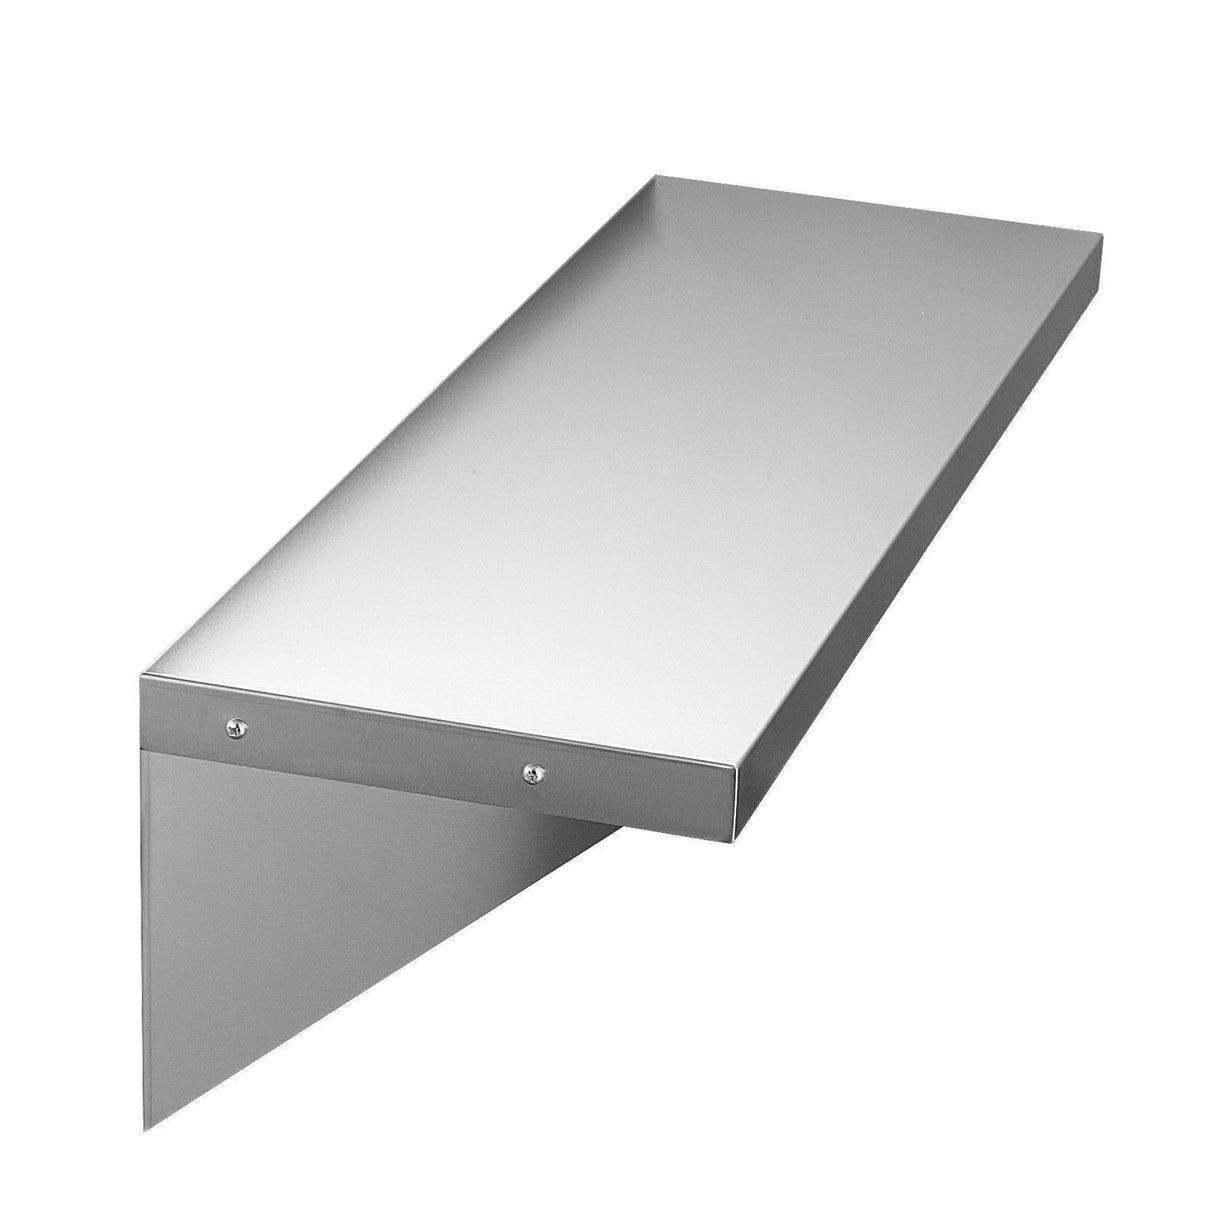 Empire Stainless Steel Wall Shelf 900 x 300mm with Brackets & Fixings - WS-900 Stainless Steel Wall Shelves Empire   